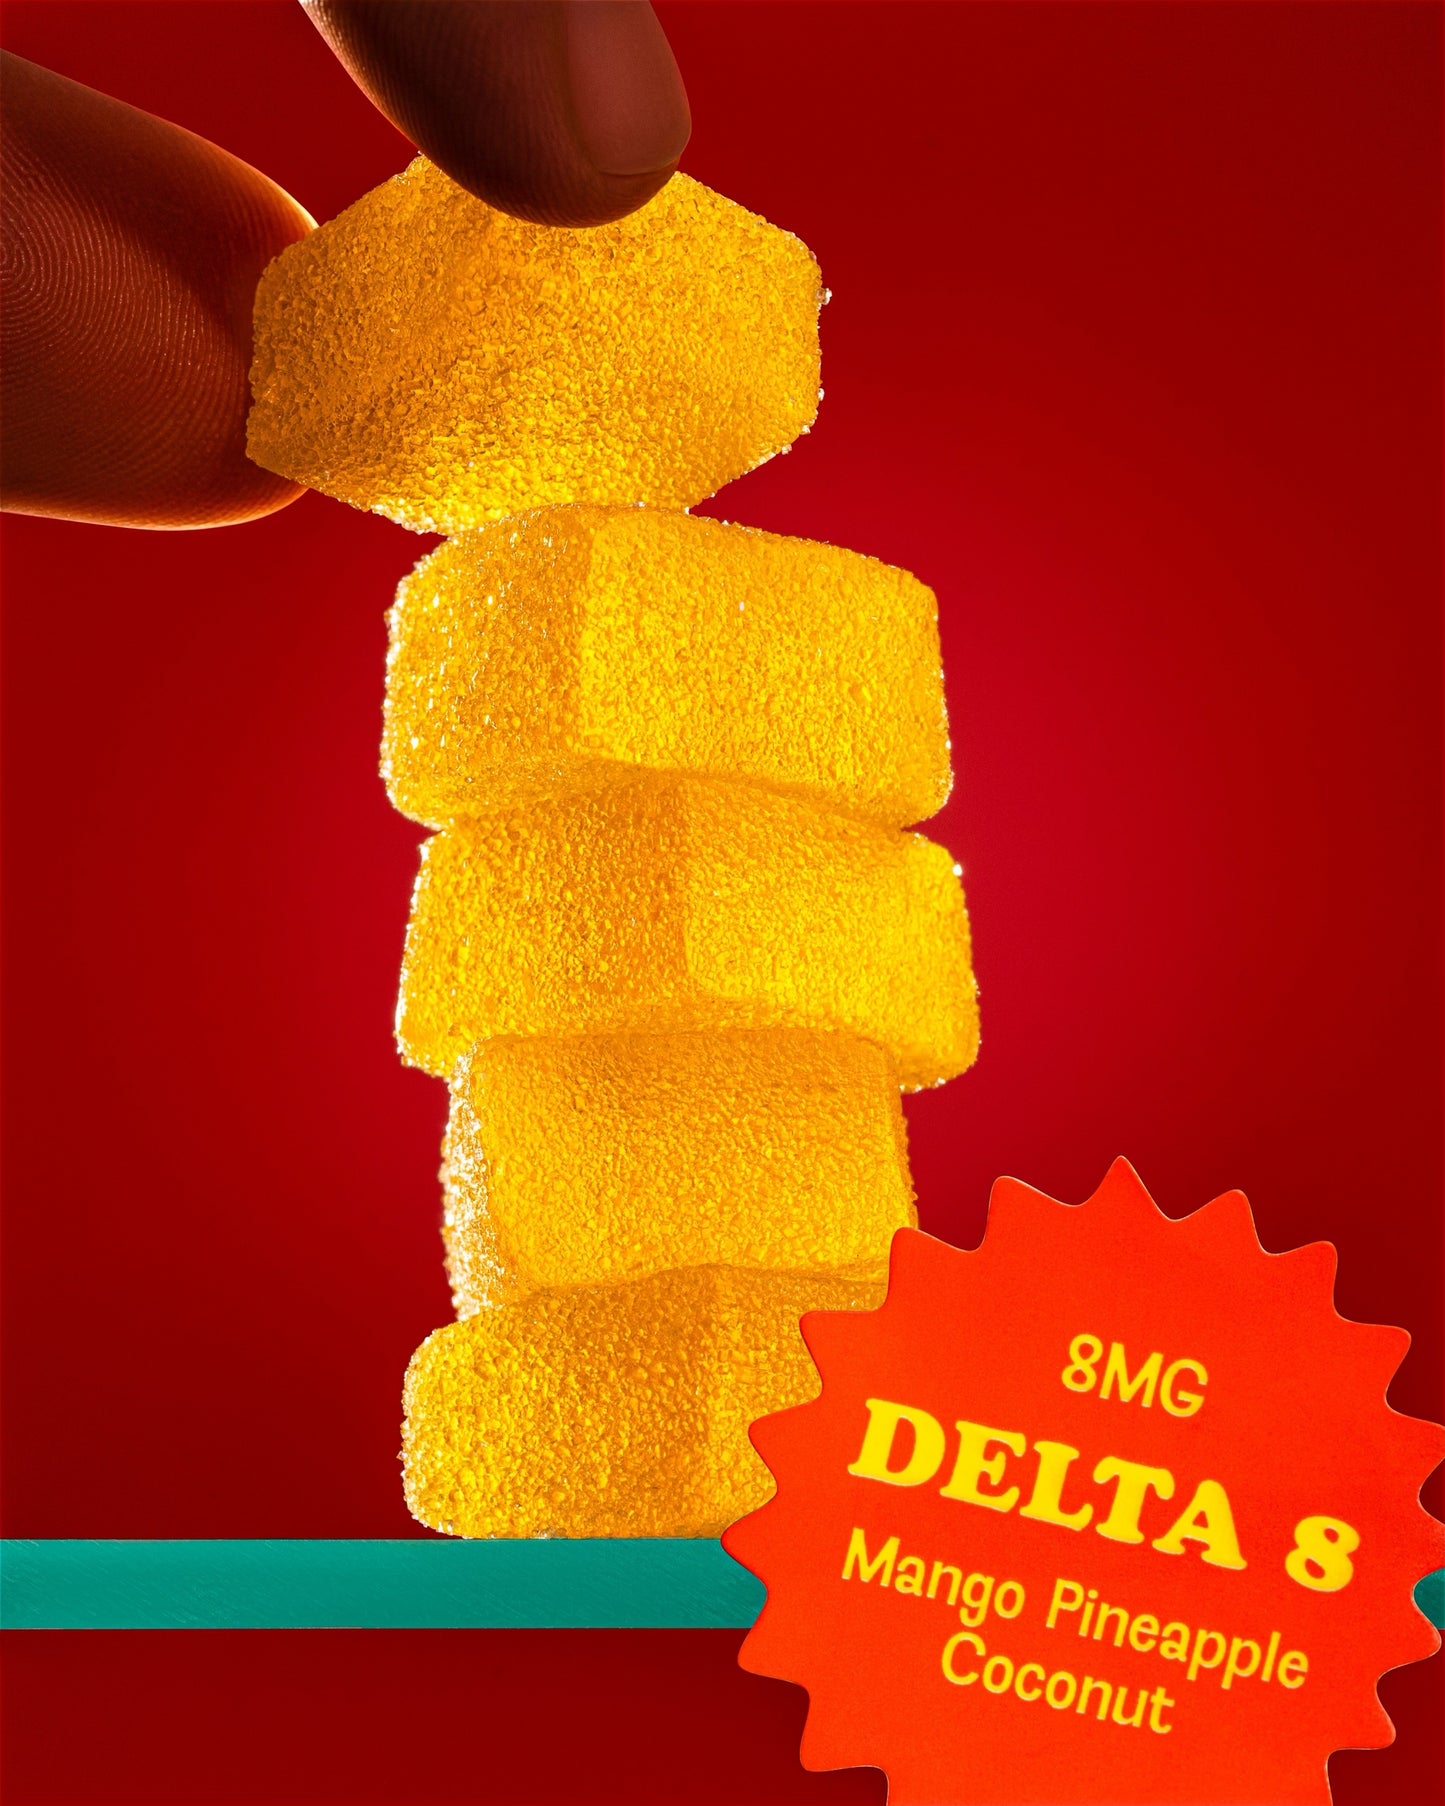 Limited Release! 8 MG Delta-8 THC Gummies - Mango Pineapple Coconut Supreme.